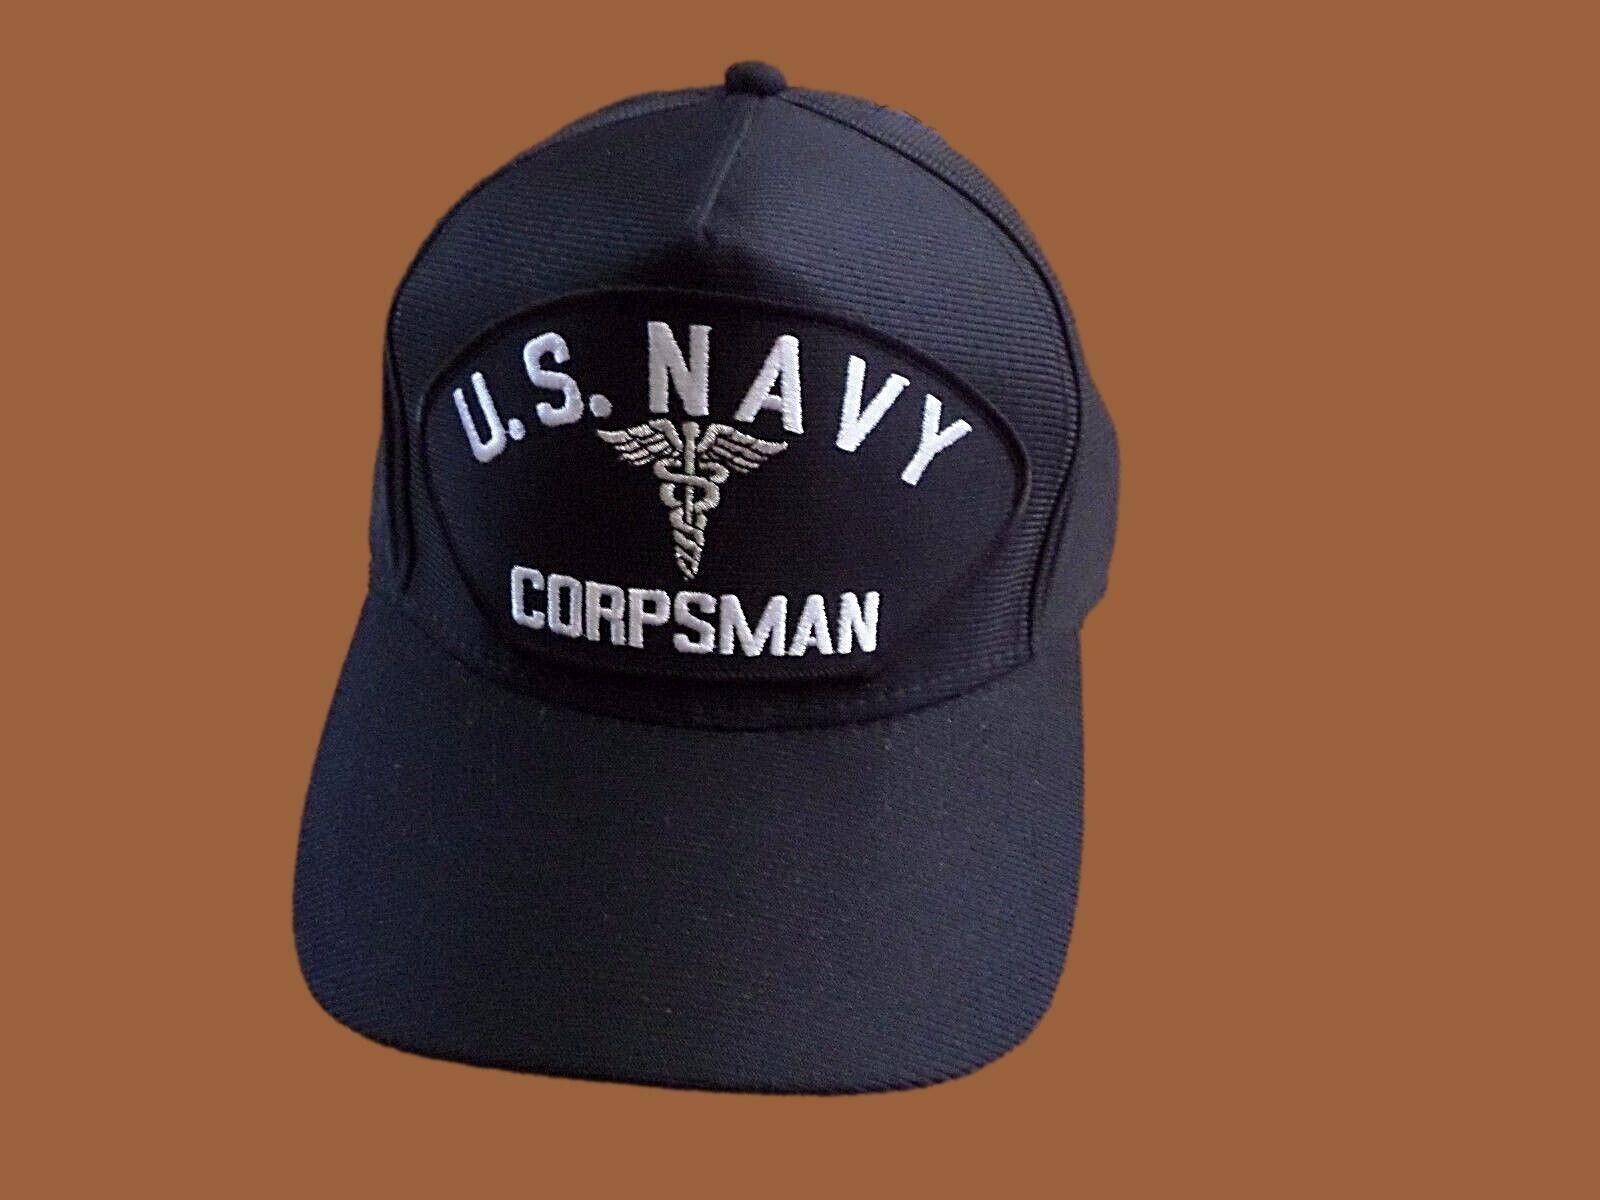 U.S MILITARY NAVY CORPSMAN HAT OFFICIAL MILITARY BALL CAP U.S.A MADE